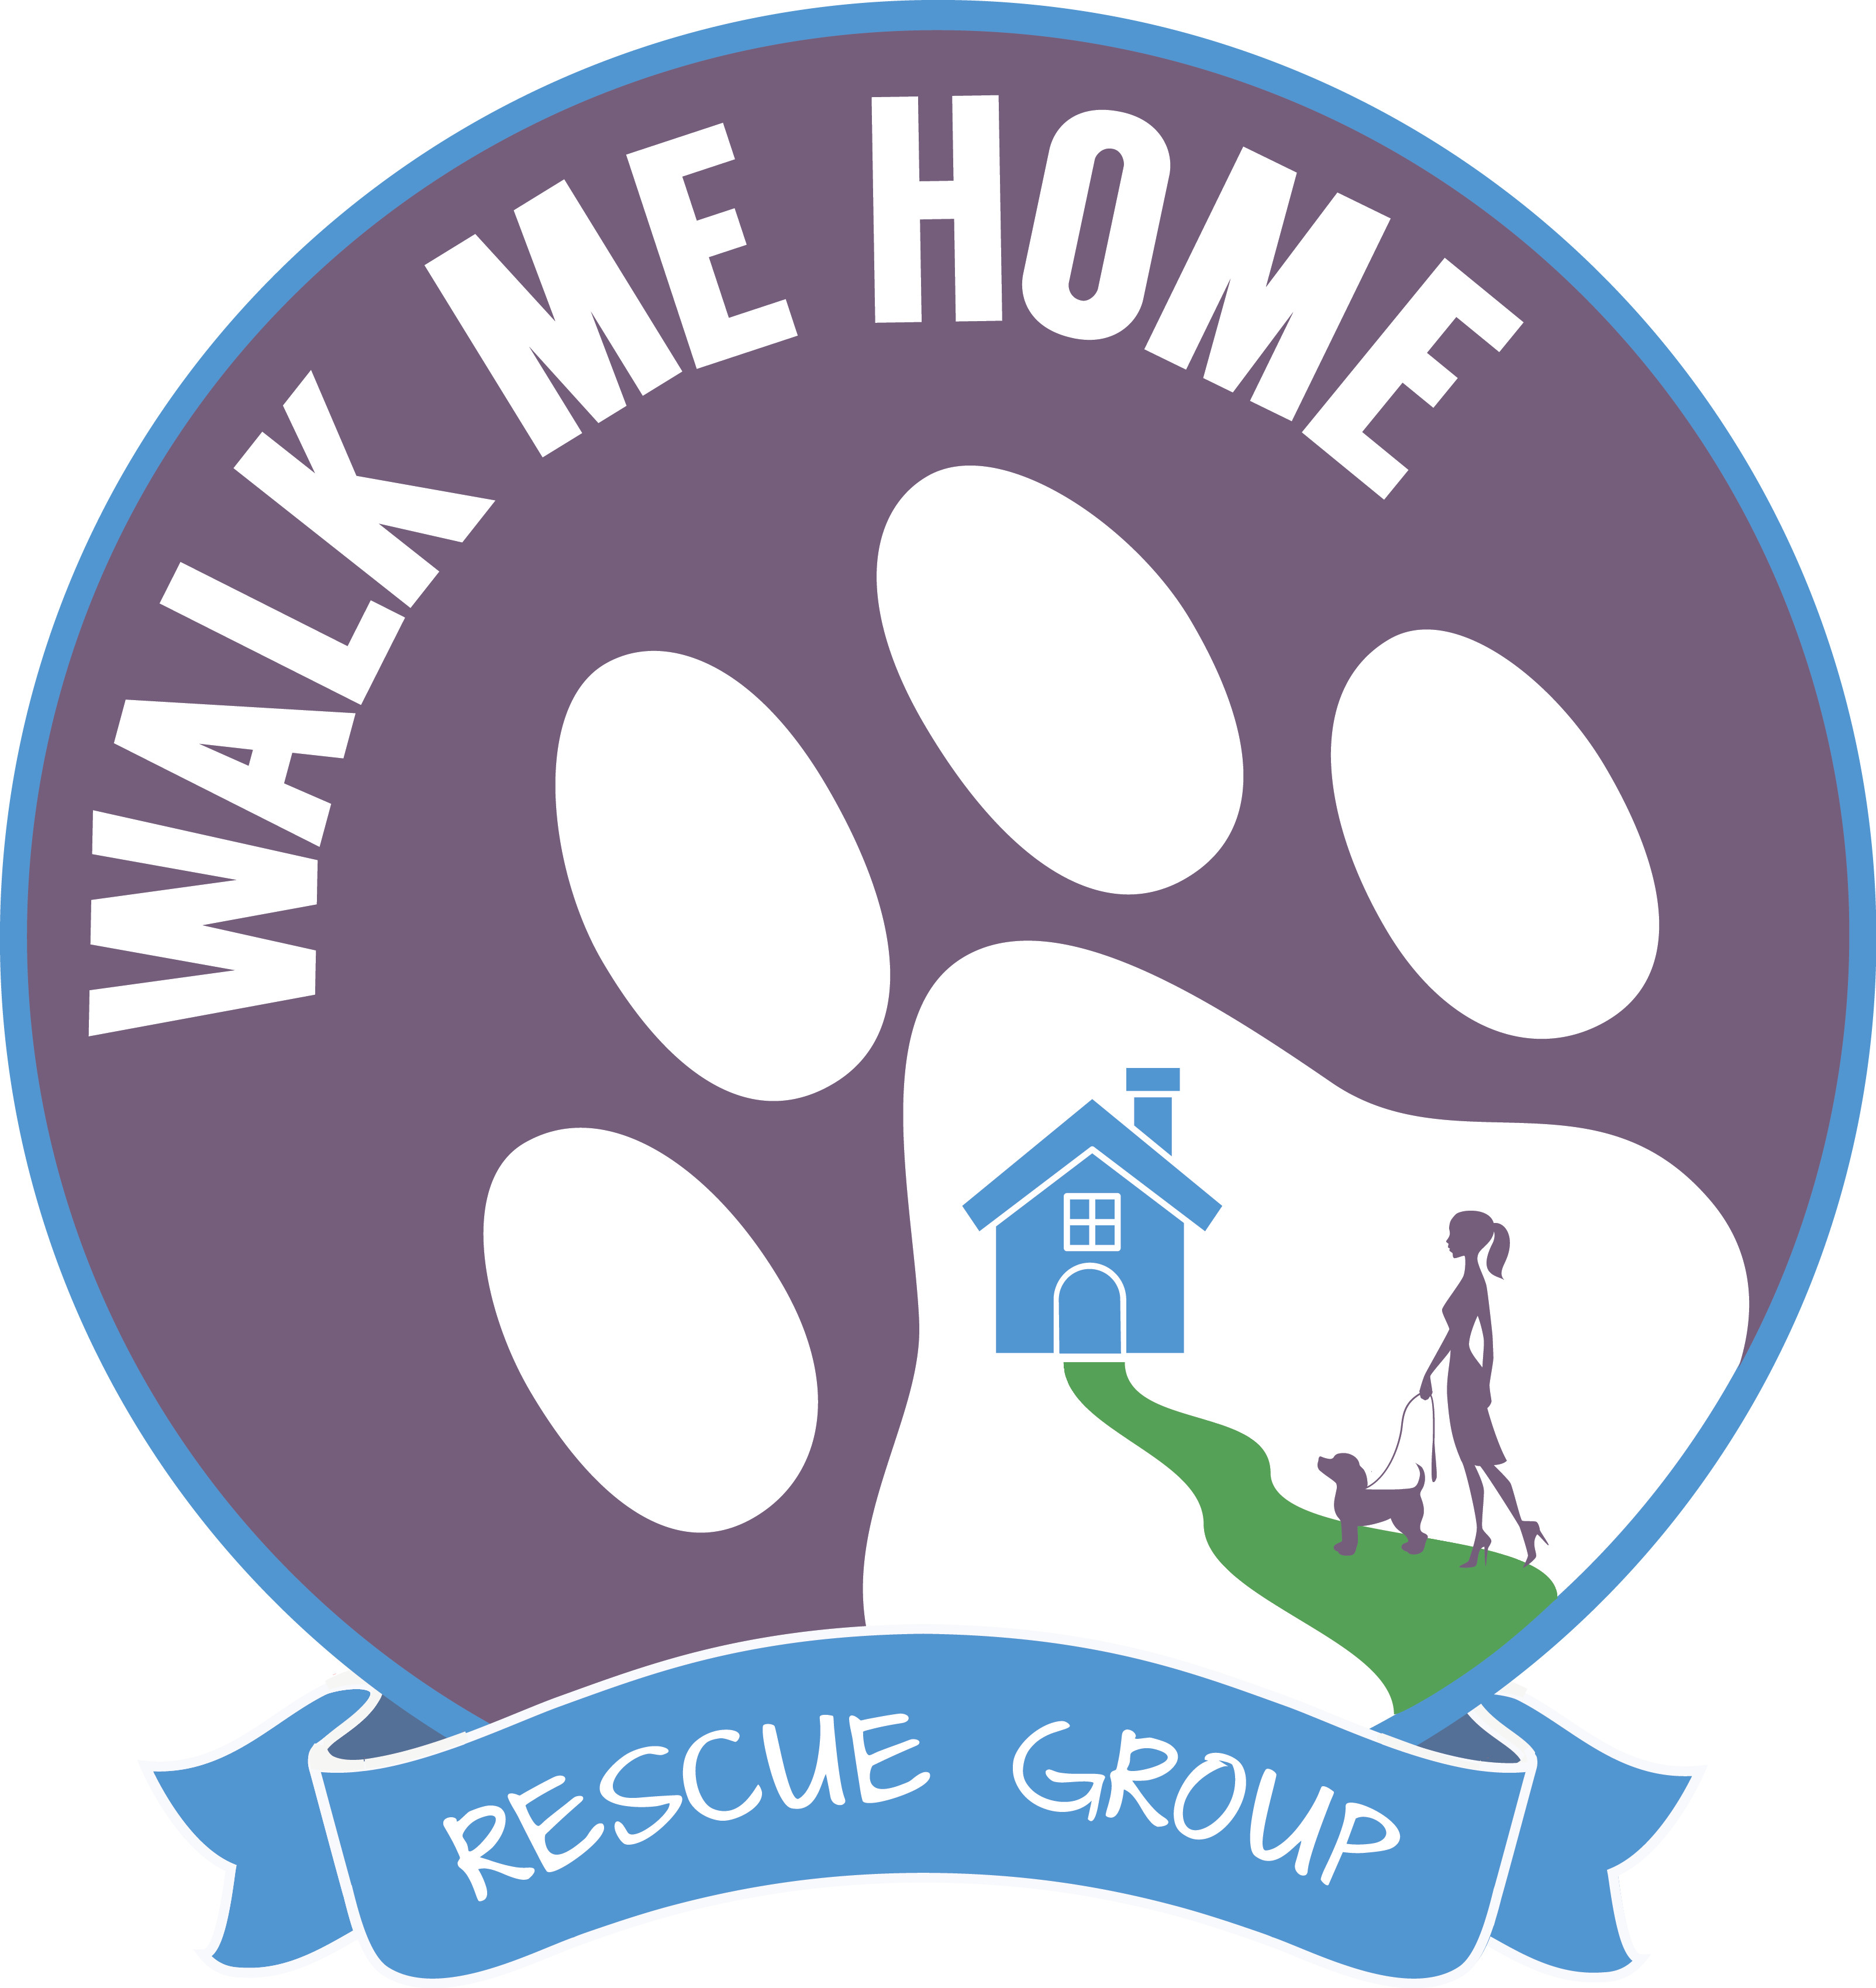 Pets for Adoption at Walk Me Home Rescue Group, in South Pasadena, CA